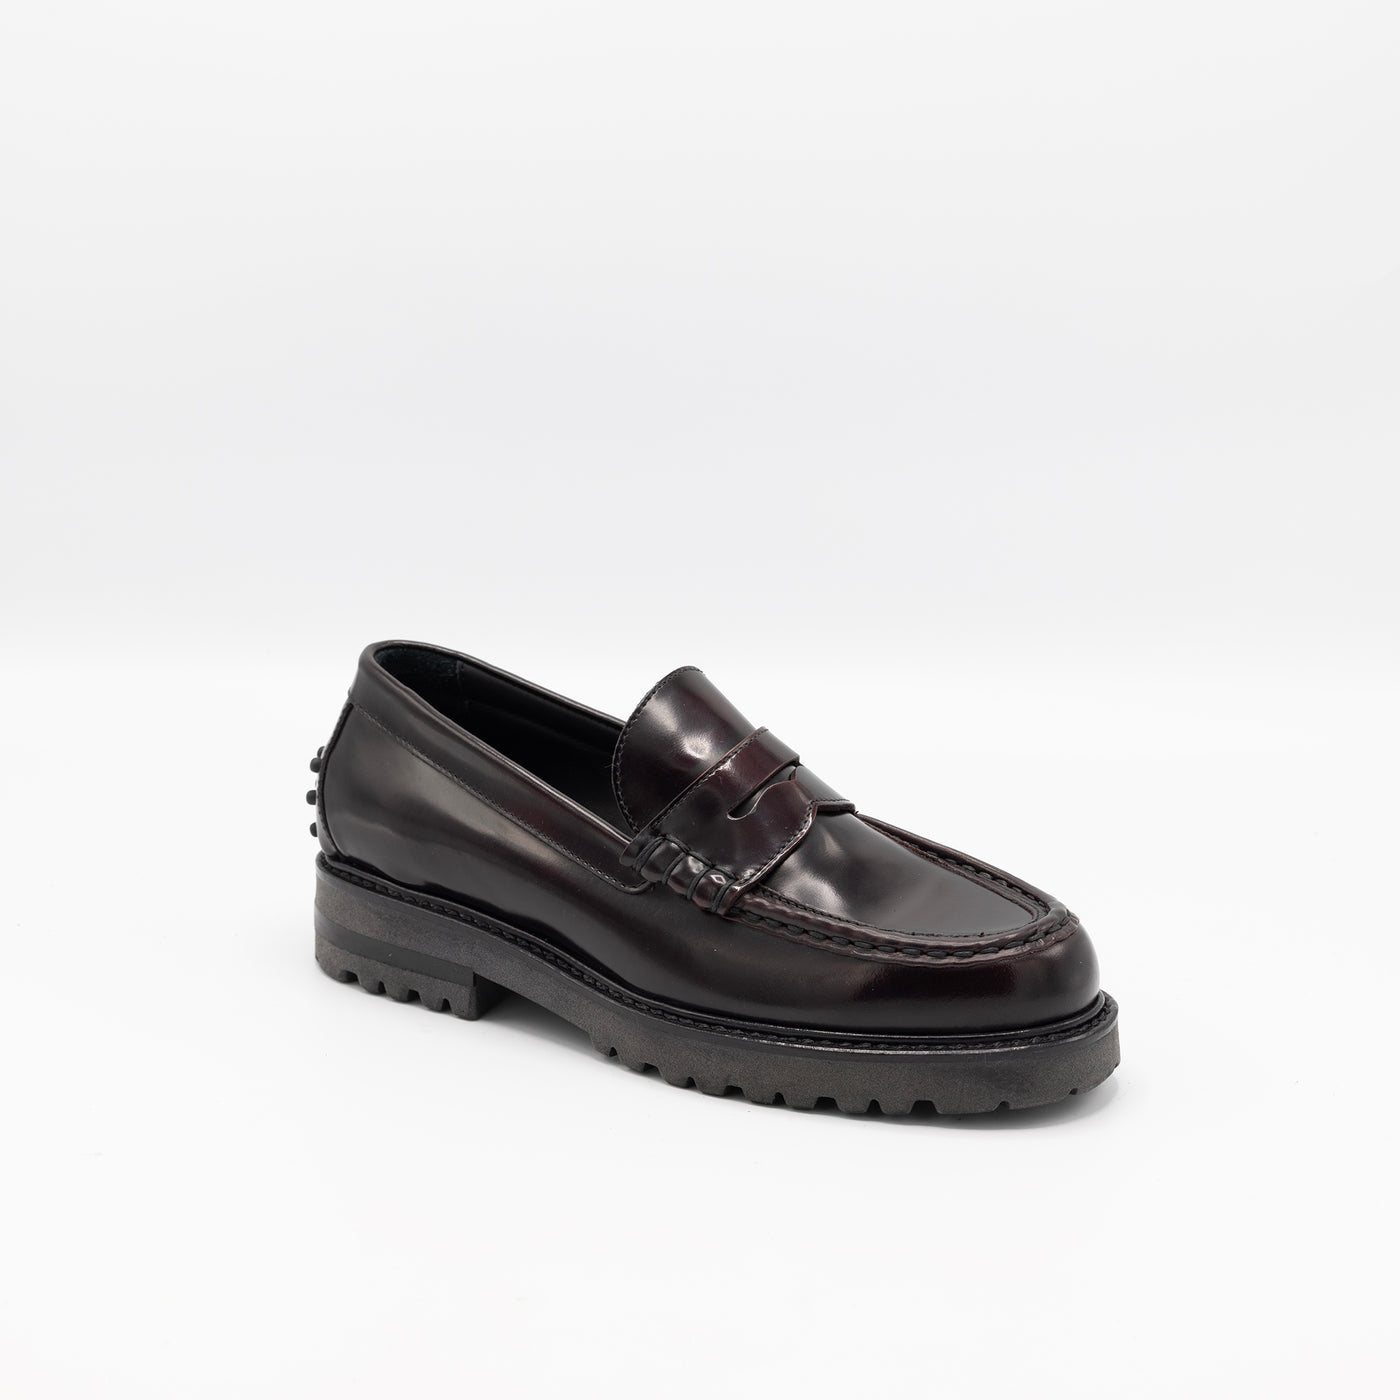 Glossy patent leather loagers with rubber pebbles on heel. 